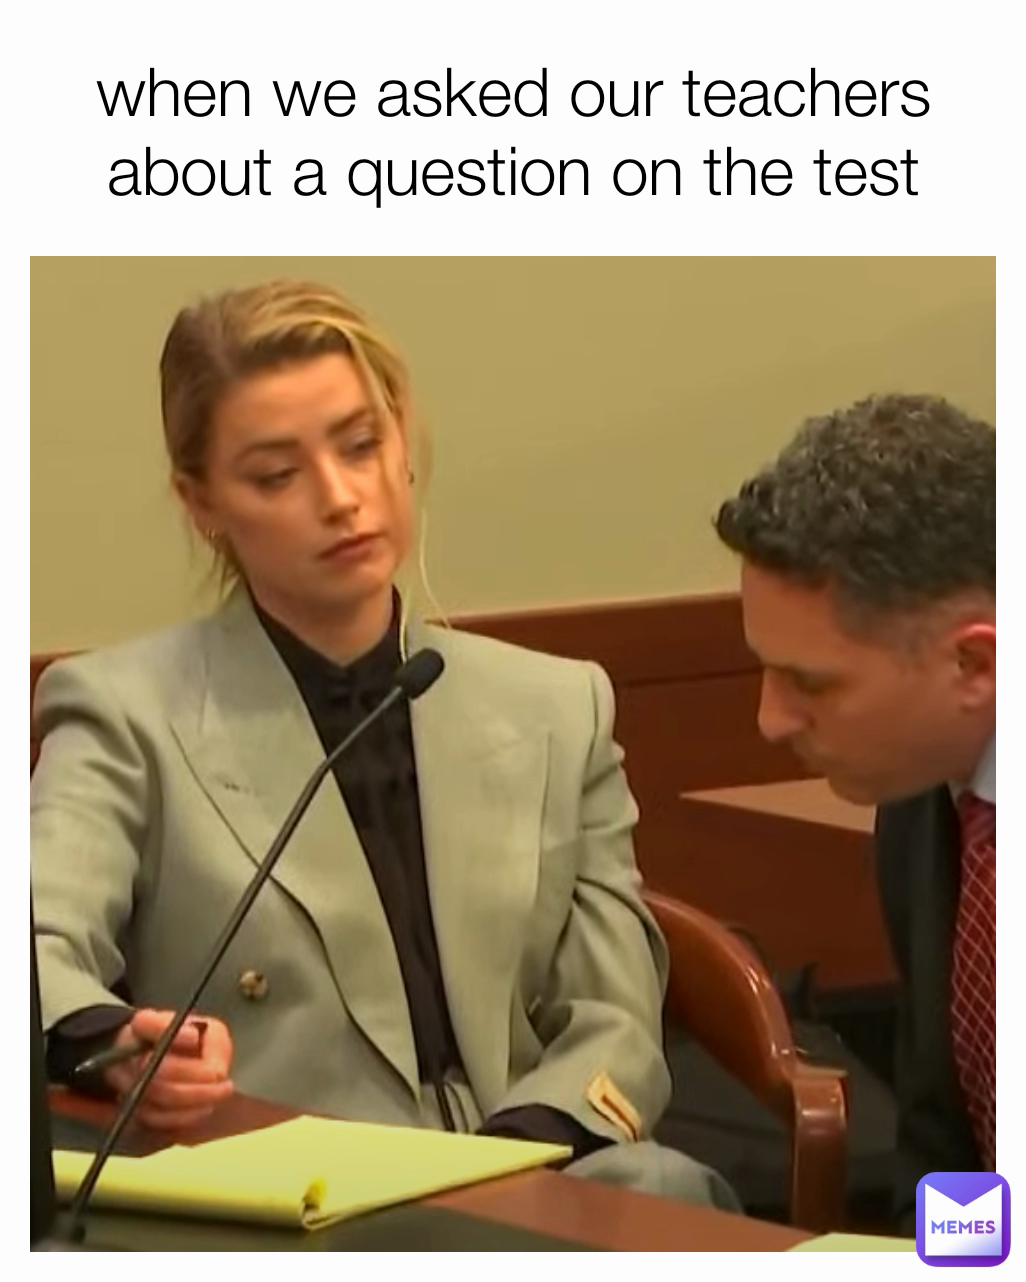 when we asked our teachers about a question on the test